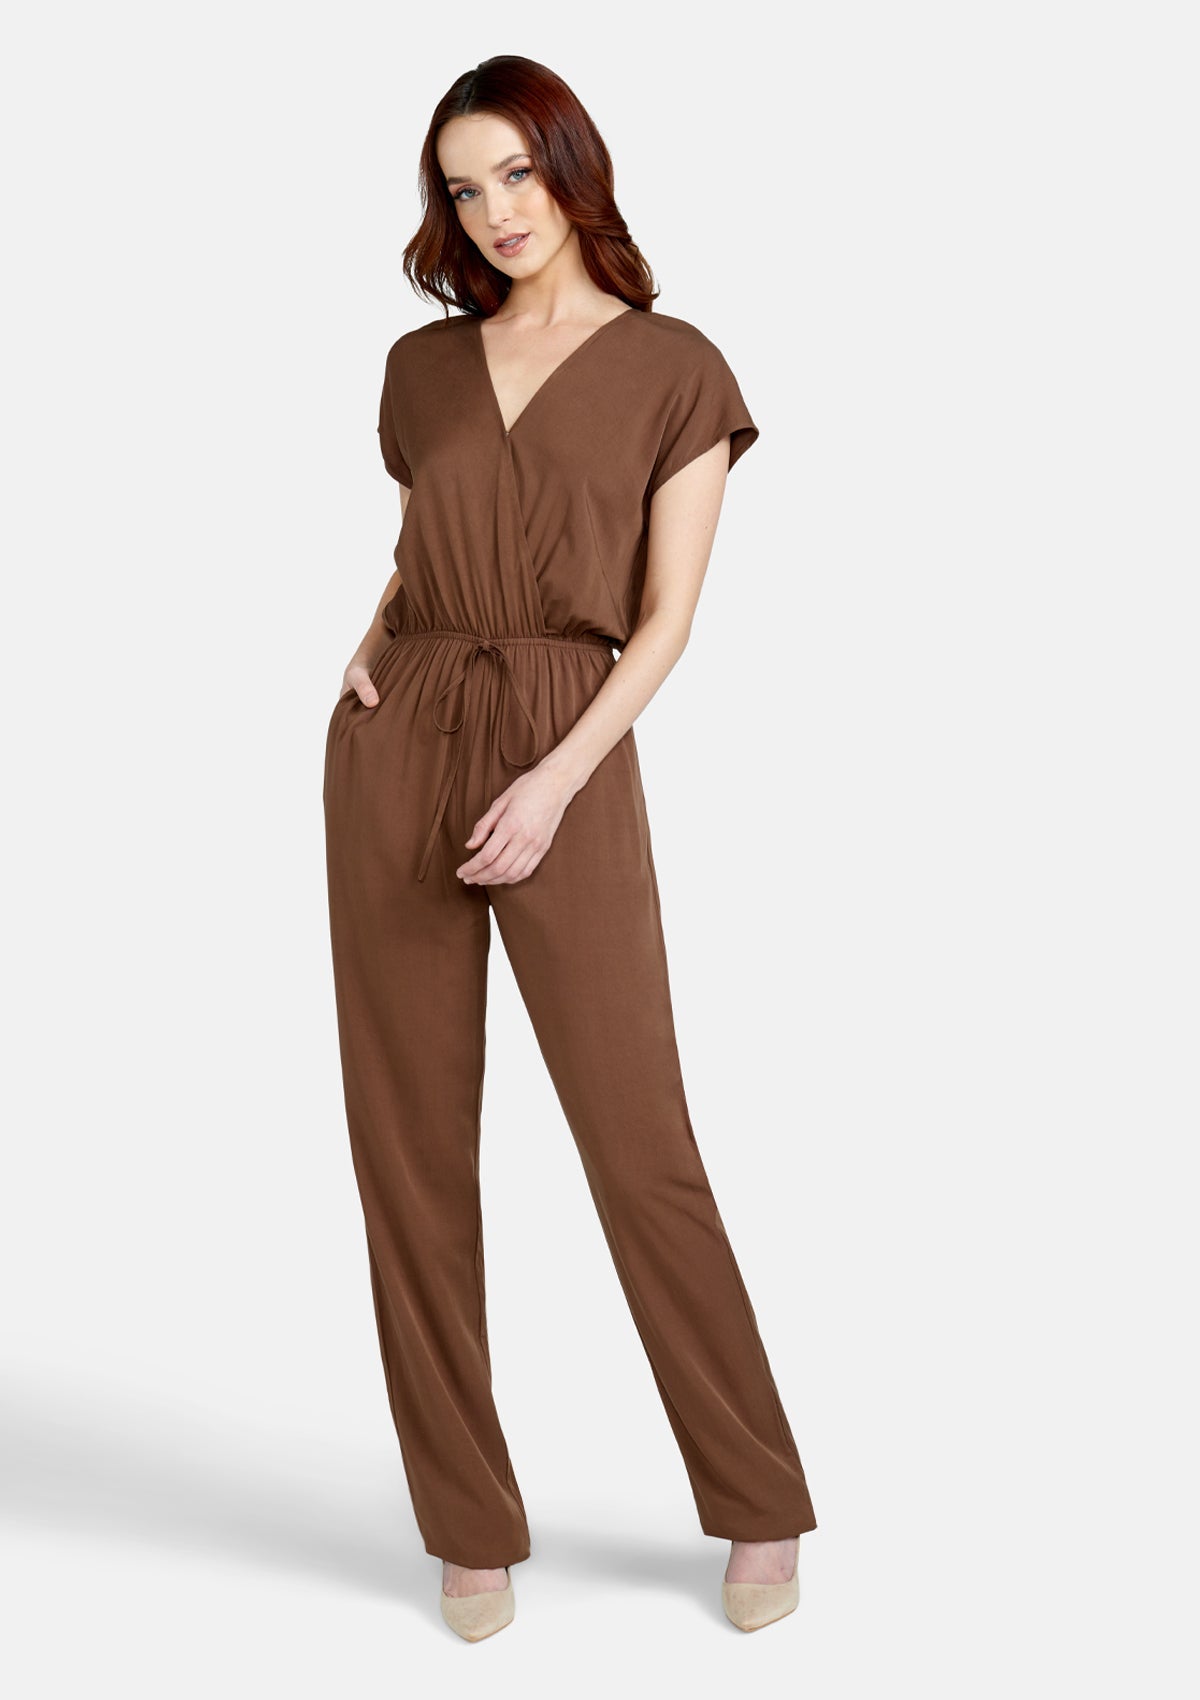 Alloy Apparel Tall Amaliah Jumpsuit for Women in Chocolate Size L | Rayon